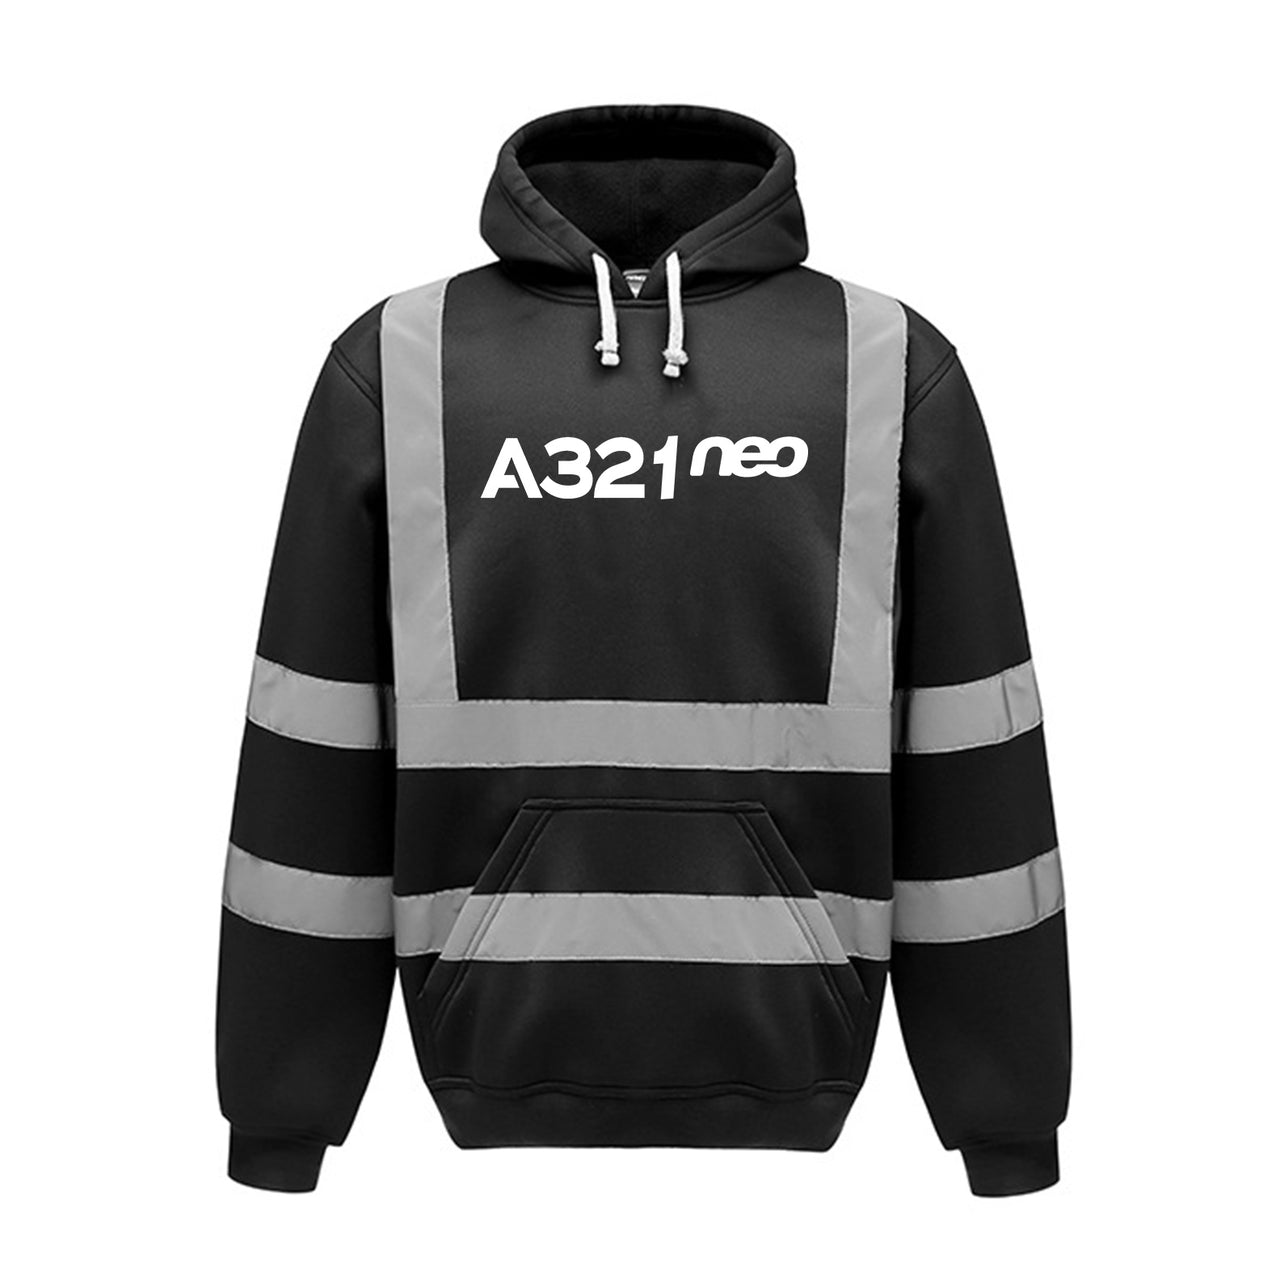 A321neo & Text Designed Reflective Hoodies